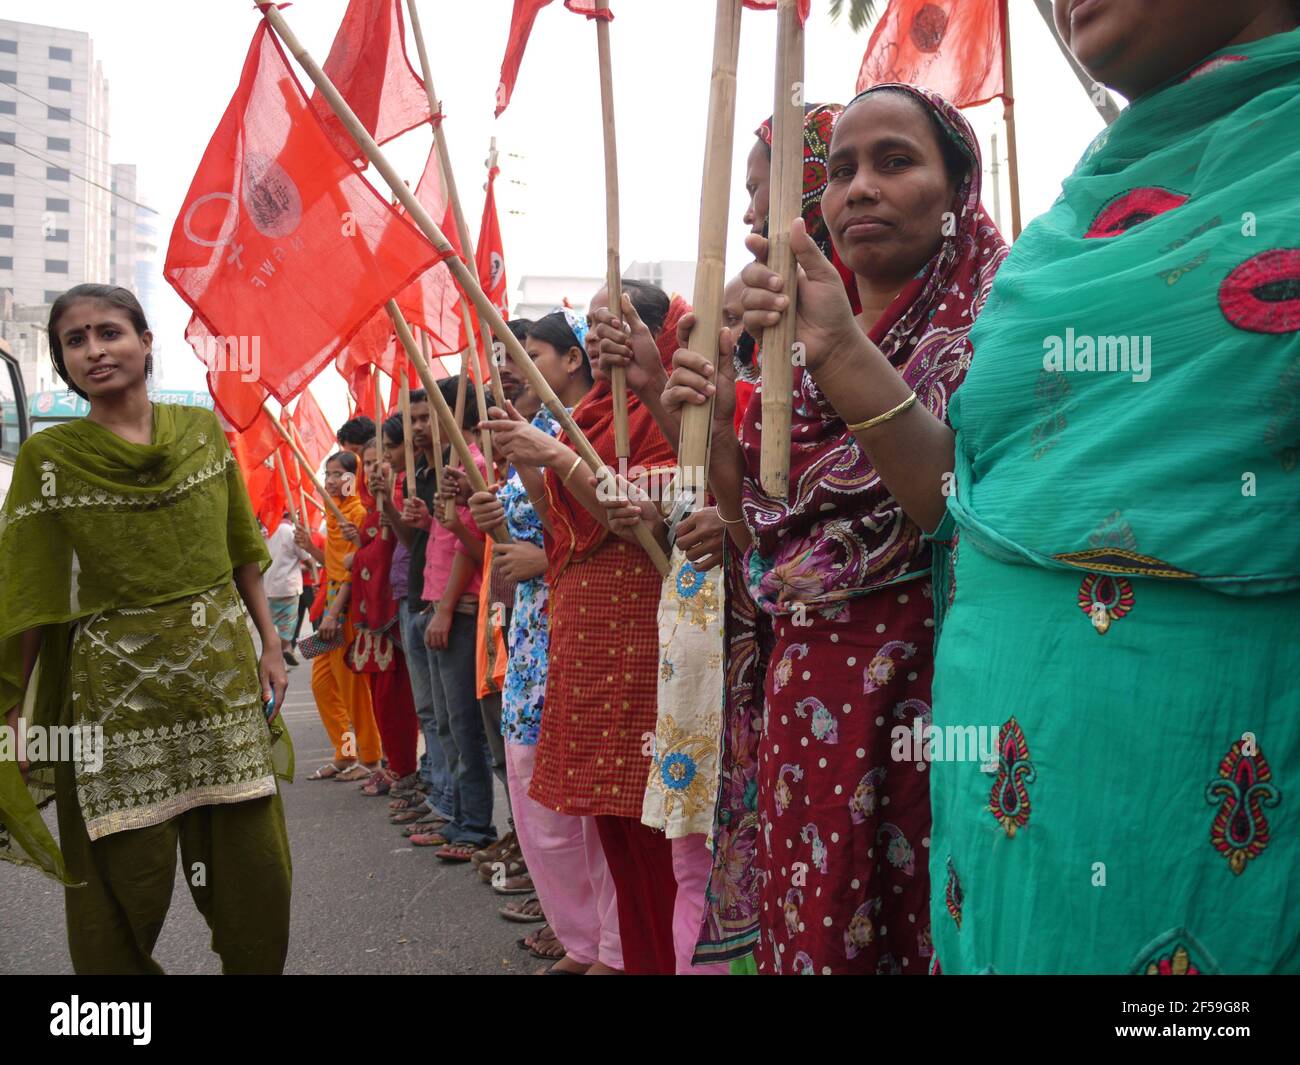 Workers of garment sector in Bangladesh demonstrate for better working conditions in Dhaka Stock Photo